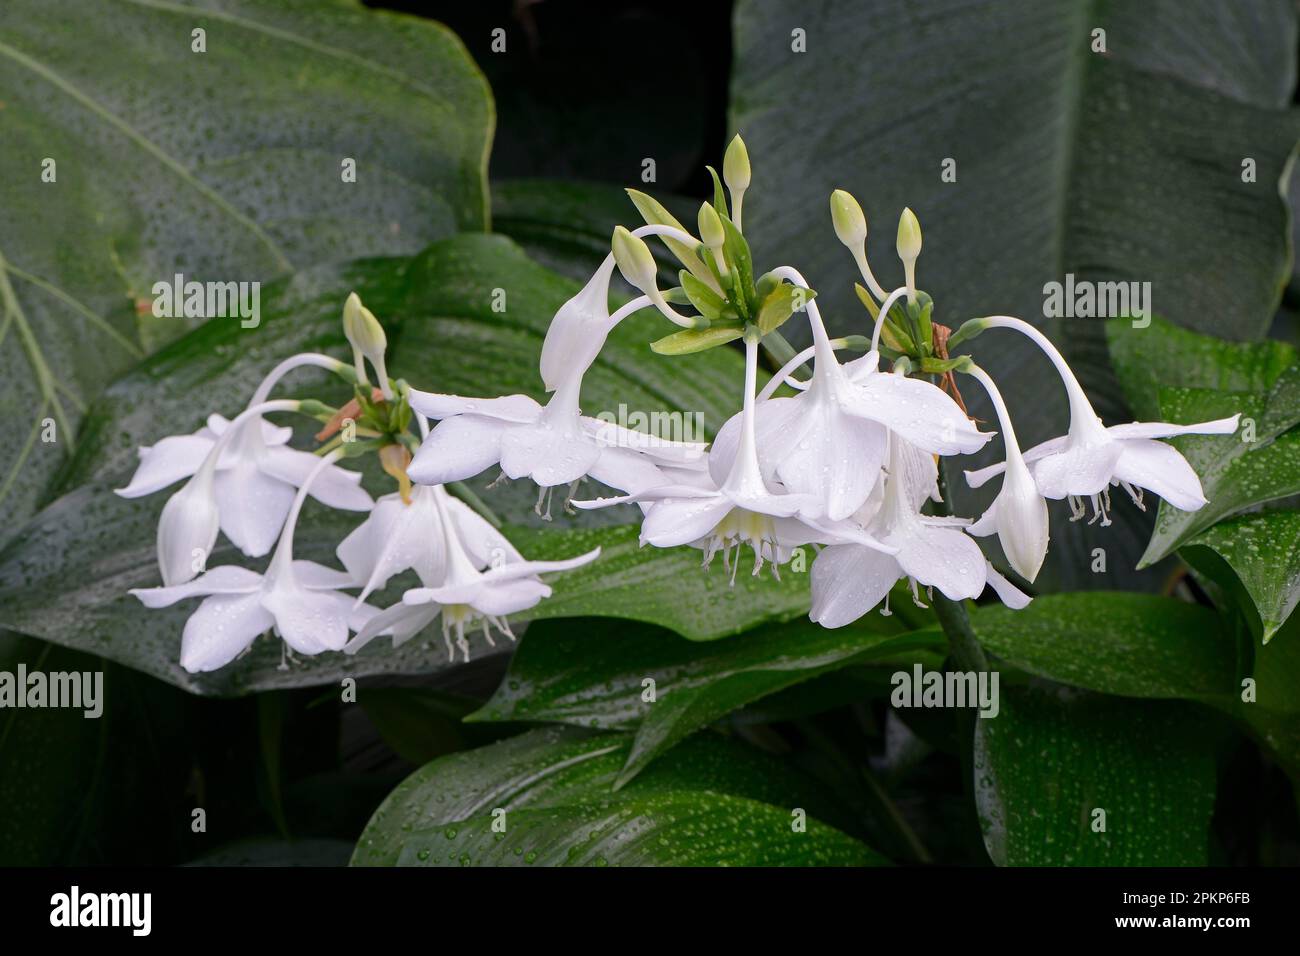 Heart chalice or amazon lily (Eucharis amazonica), Occurrence South America Stock Photo